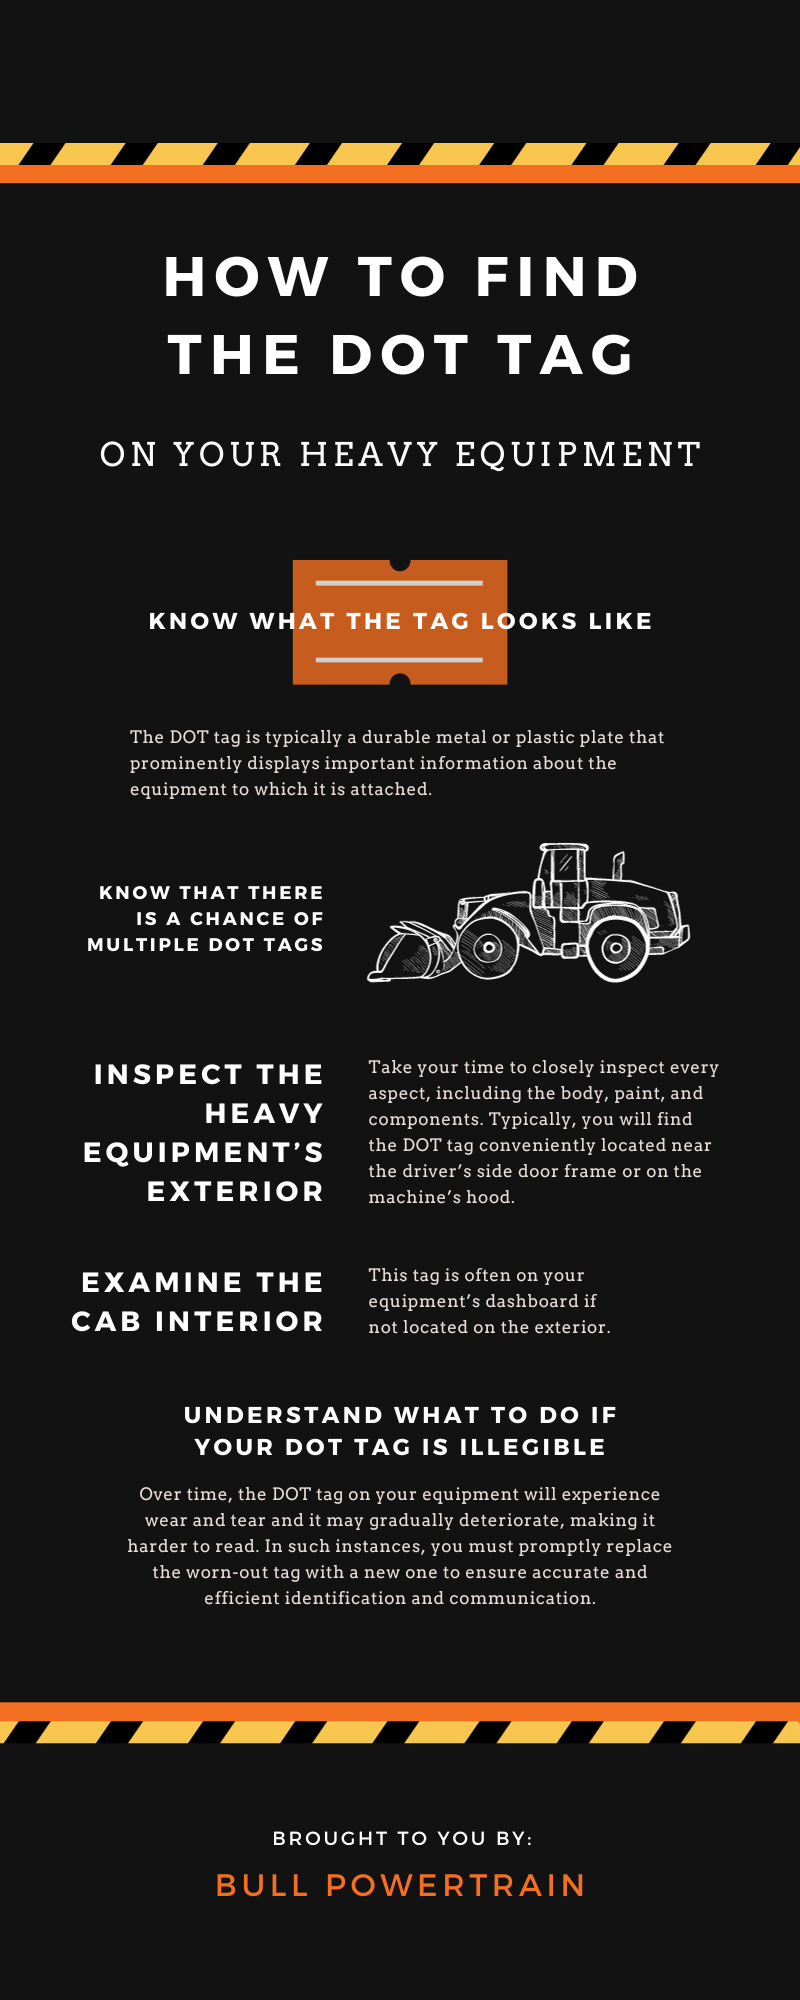 How To Find the DOT Tag on Your Heavy Equipment